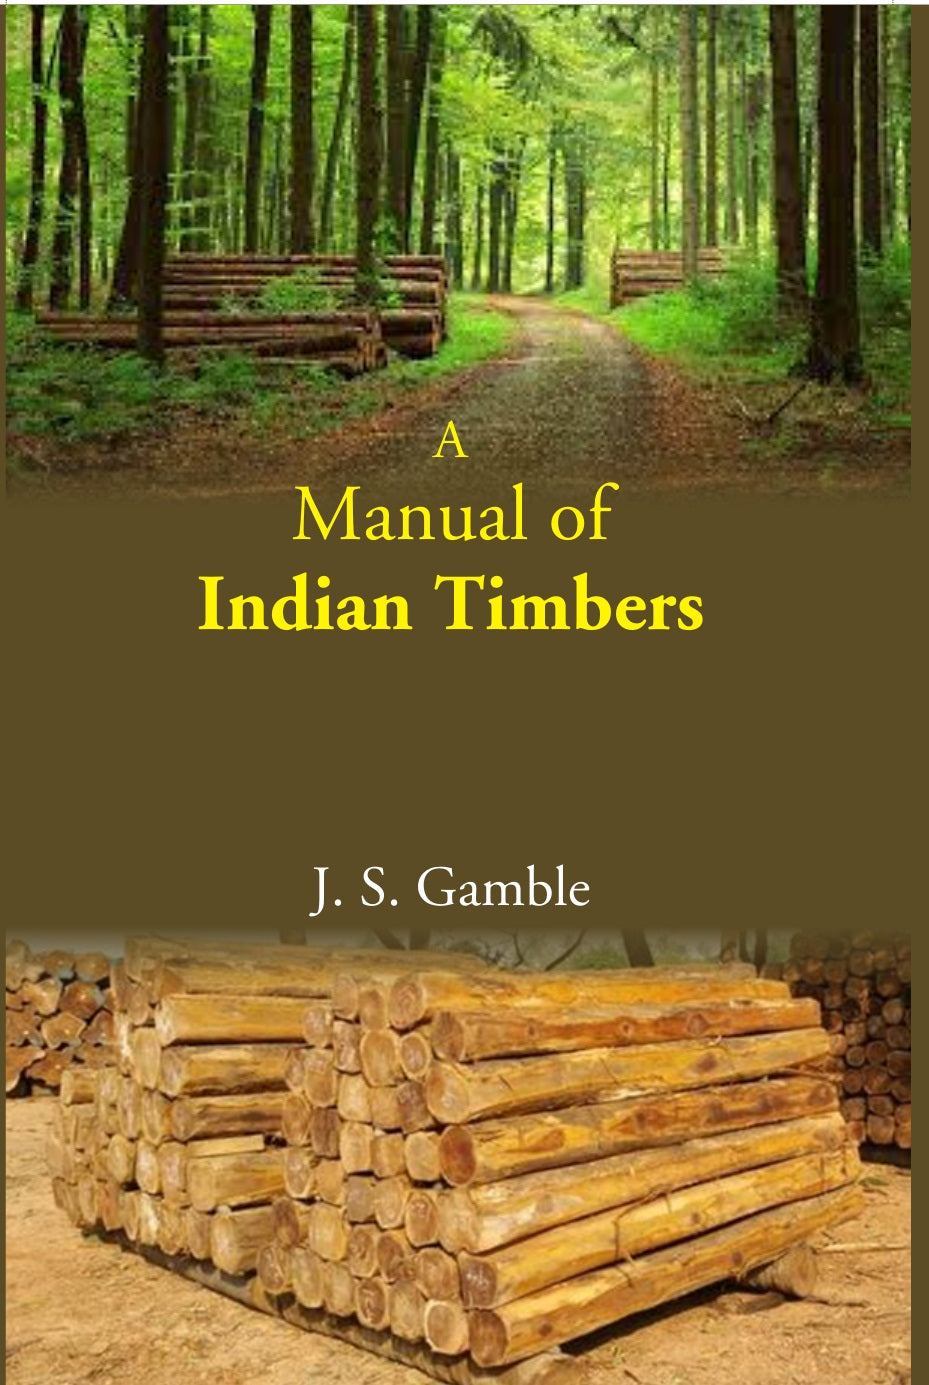 A Manual Of Indian Timbers